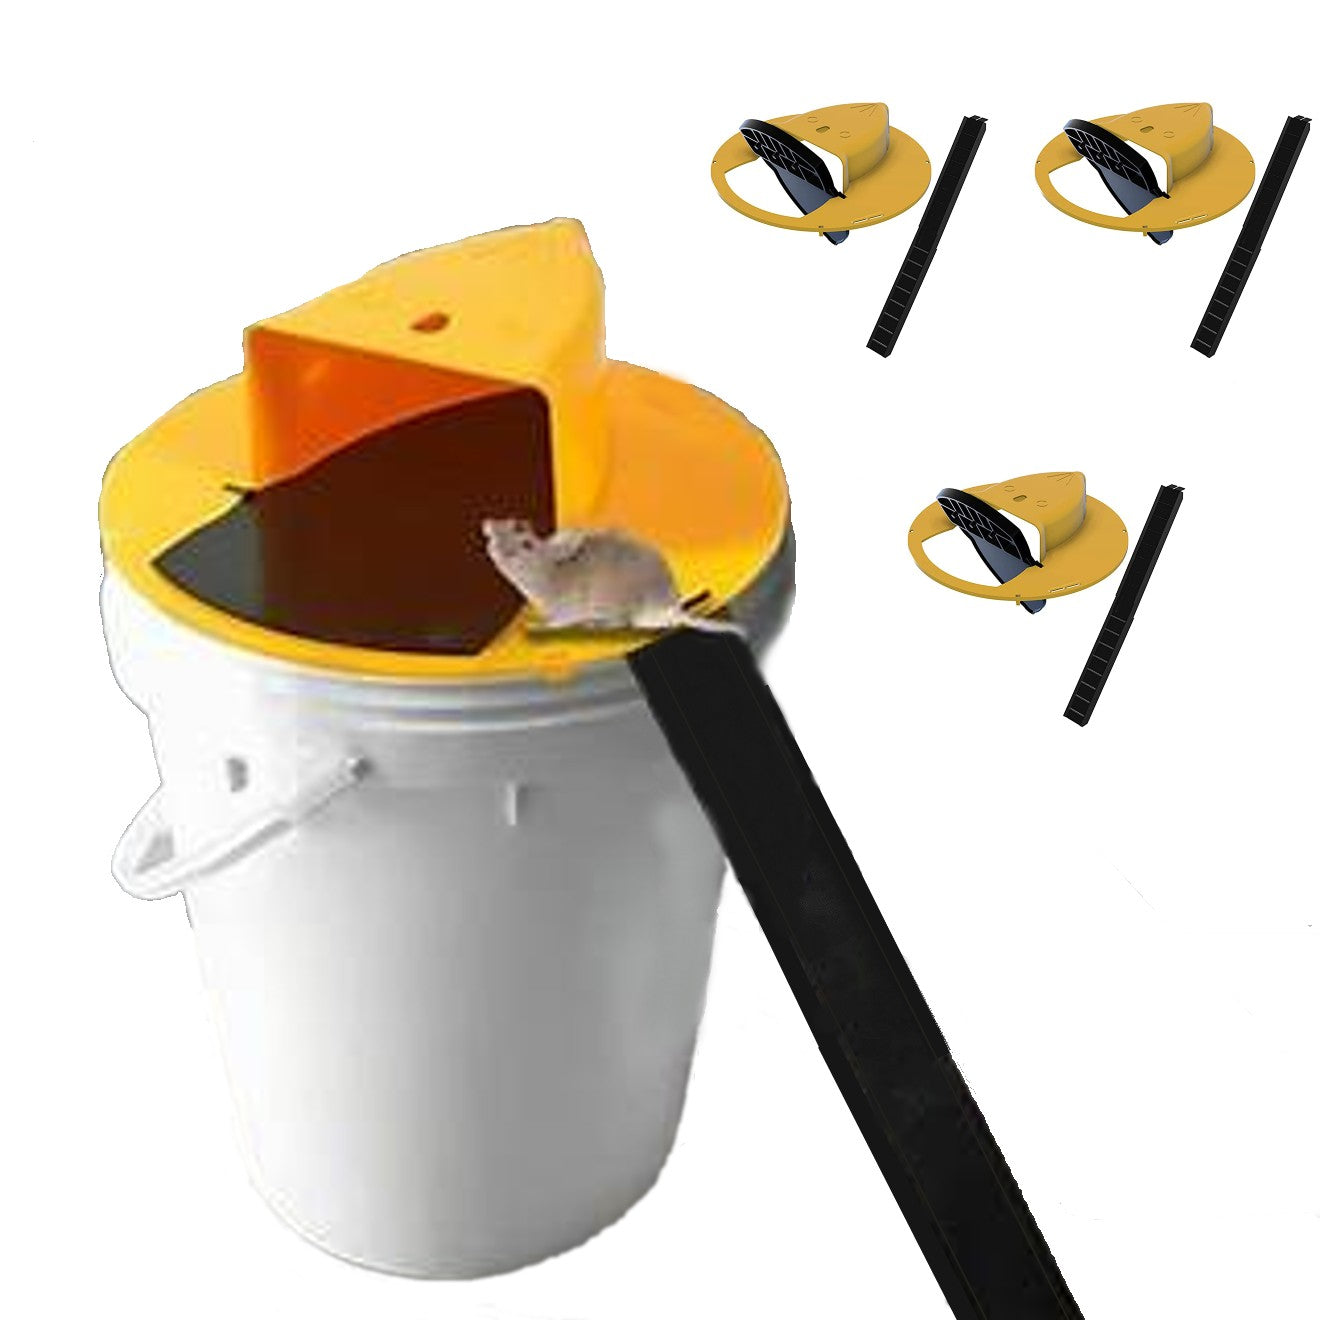 Humane Flip N' Slide Bucket Flip-Lid Mouse and Rat Trap by The